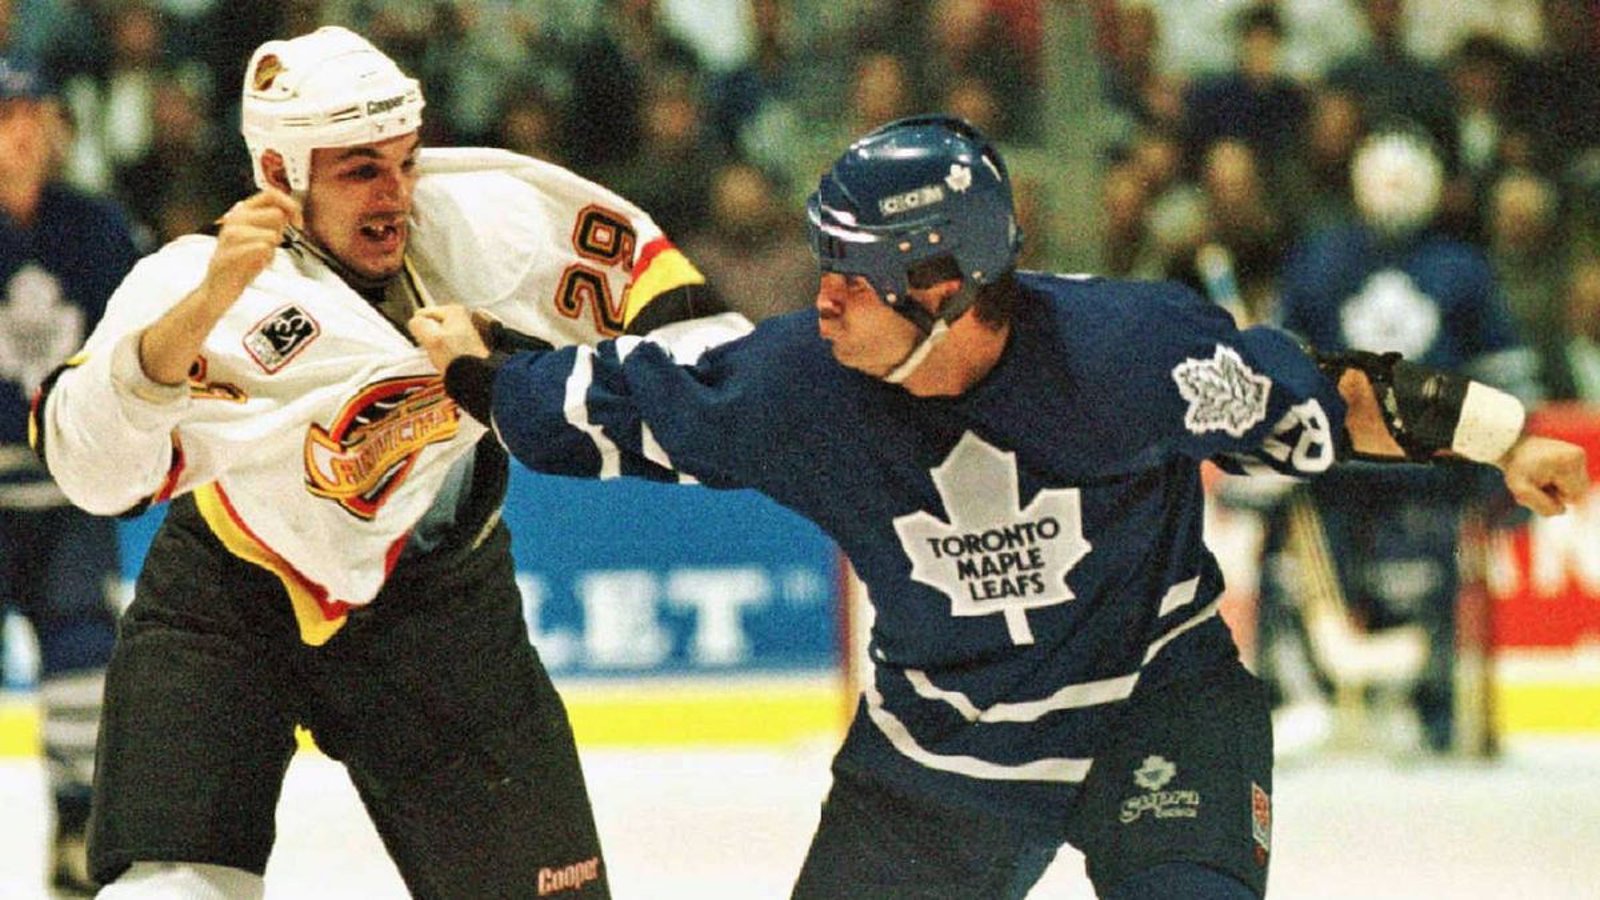 Former NHL enforcer Gino Odjick is fighting for his life.